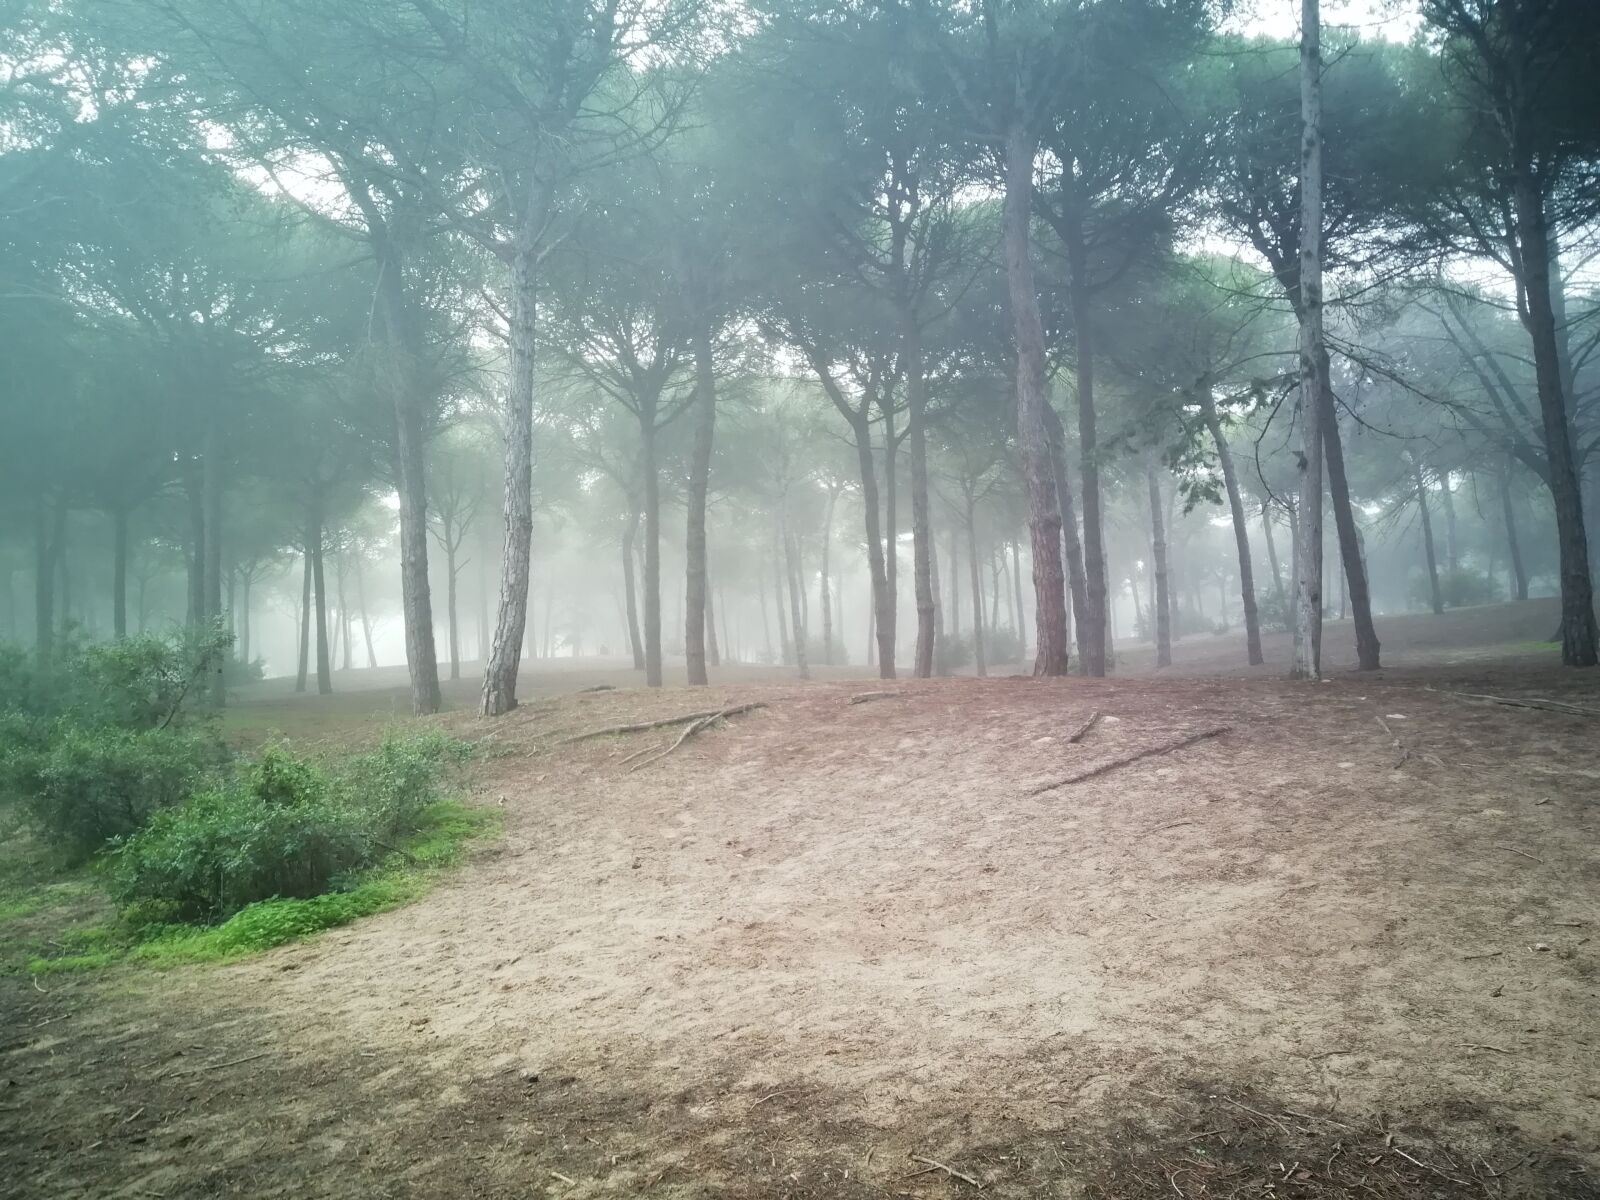 HUAWEI FIG-LX1 sample photo. Fog, forest, nature photography